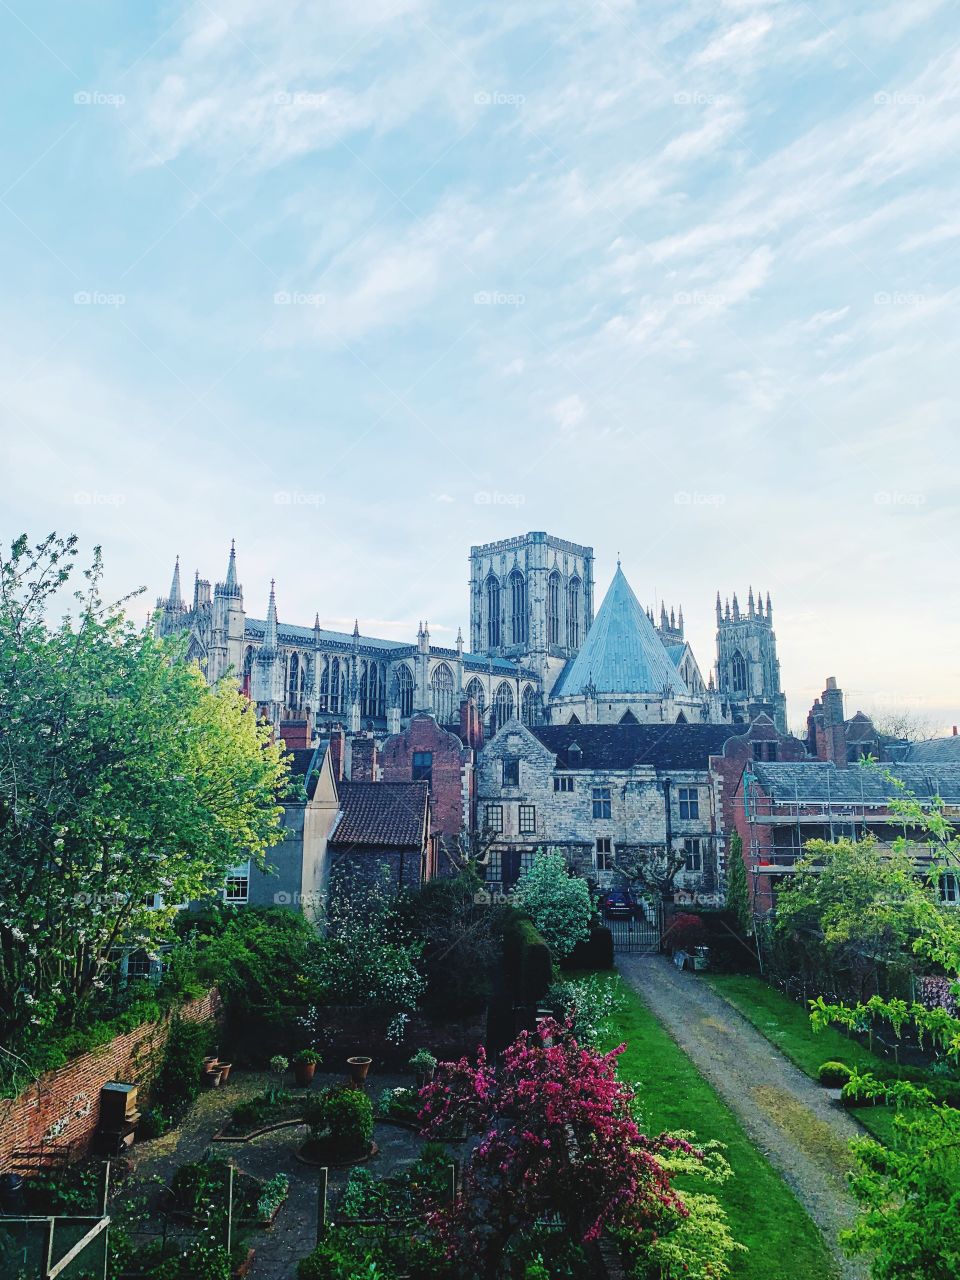 A hidden view of the stunning York Minster taken from the city’s ancient walls. This photo shows the less seen side of the beautiful City of York. 